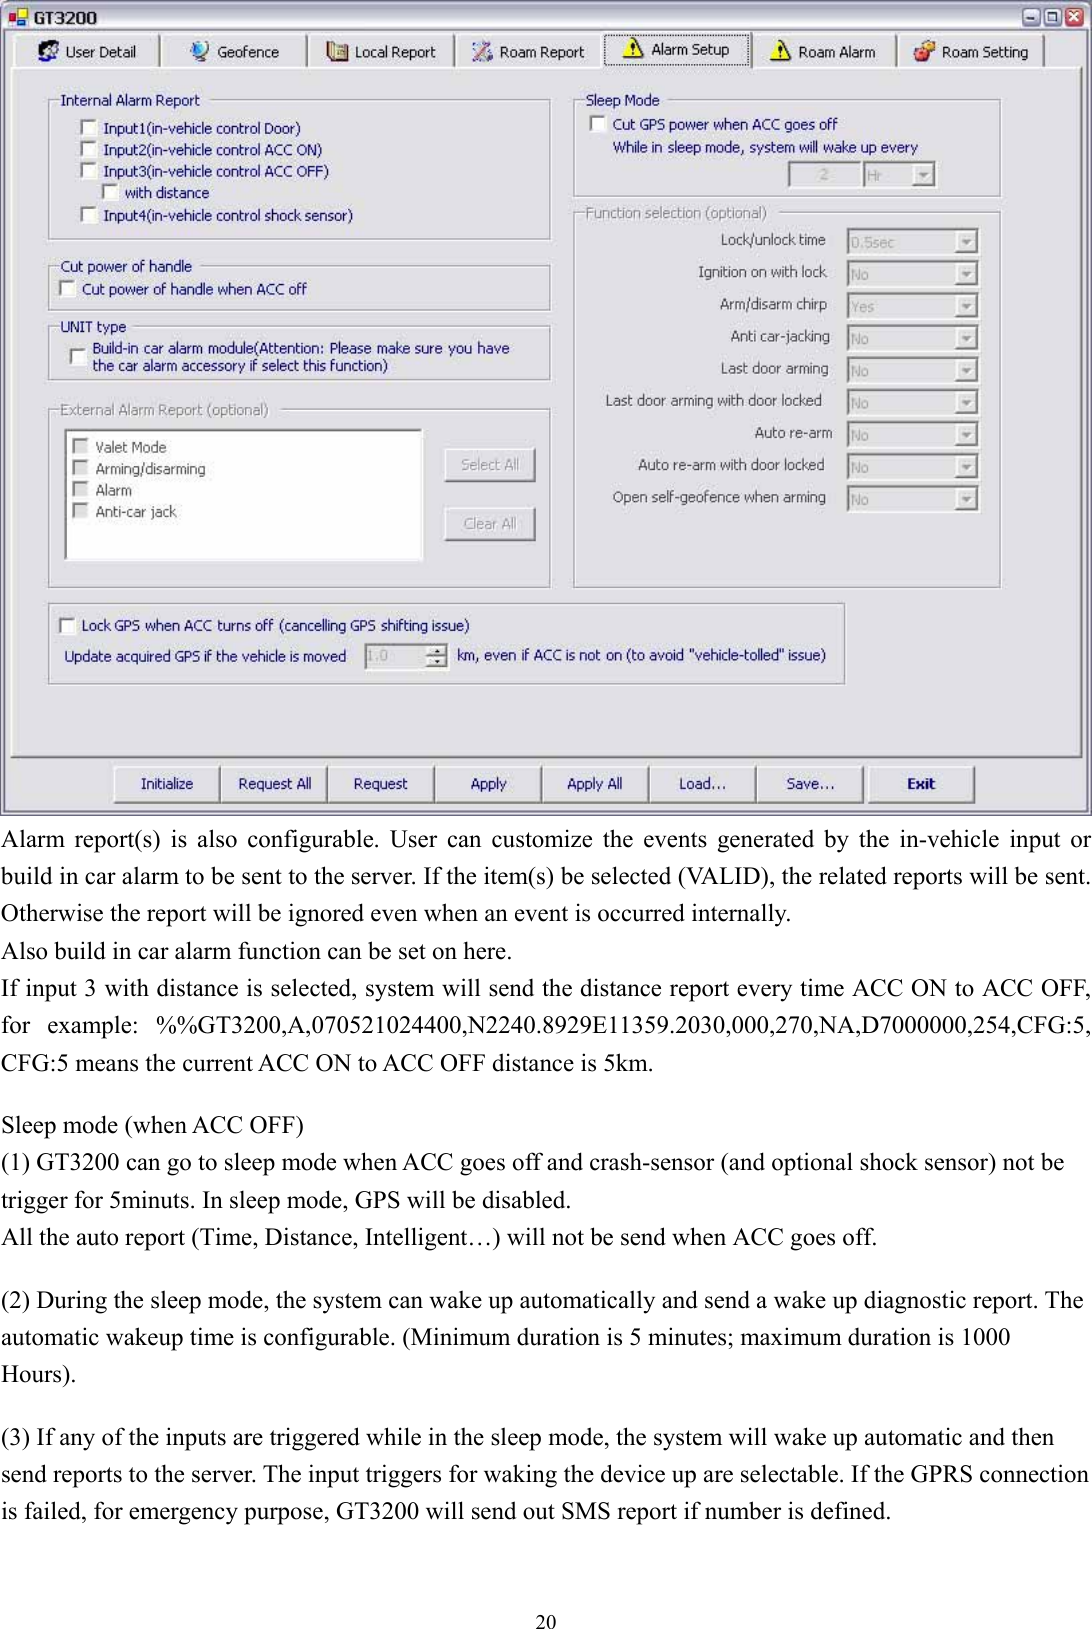  20 Alarm report(s) is also configurable. User can customize the events generated by the in-vehicle input or build in car alarm to be sent to the server. If the item(s) be selected (VALID), the related reports will be sent. Otherwise the report will be ignored even when an event is occurred internally.   Also build in car alarm function can be set on here. If input 3 with distance is selected, system will send the distance report every time ACC ON to ACC OFF, for example: %%GT3200,A,070521024400,N2240.8929E11359.2030,000,270,NA,D7000000,254,CFG:5, CFG:5 means the current ACC ON to ACC OFF distance is 5km.  Sleep mode (when ACC OFF) (1) GT3200 can go to sleep mode when ACC goes off and crash-sensor (and optional shock sensor) not be trigger for 5minuts. In sleep mode, GPS will be disabled. All the auto report (Time, Distance, Intelligent…) will not be send when ACC goes off.  (2) During the sleep mode, the system can wake up automatically and send a wake up diagnostic report. The automatic wakeup time is configurable. (Minimum duration is 5 minutes; maximum duration is 1000 Hours).  (3) If any of the inputs are triggered while in the sleep mode, the system will wake up automatic and then send reports to the server. The input triggers for waking the device up are selectable. If the GPRS connection is failed, for emergency purpose, GT3200 will send out SMS report if number is defined. 